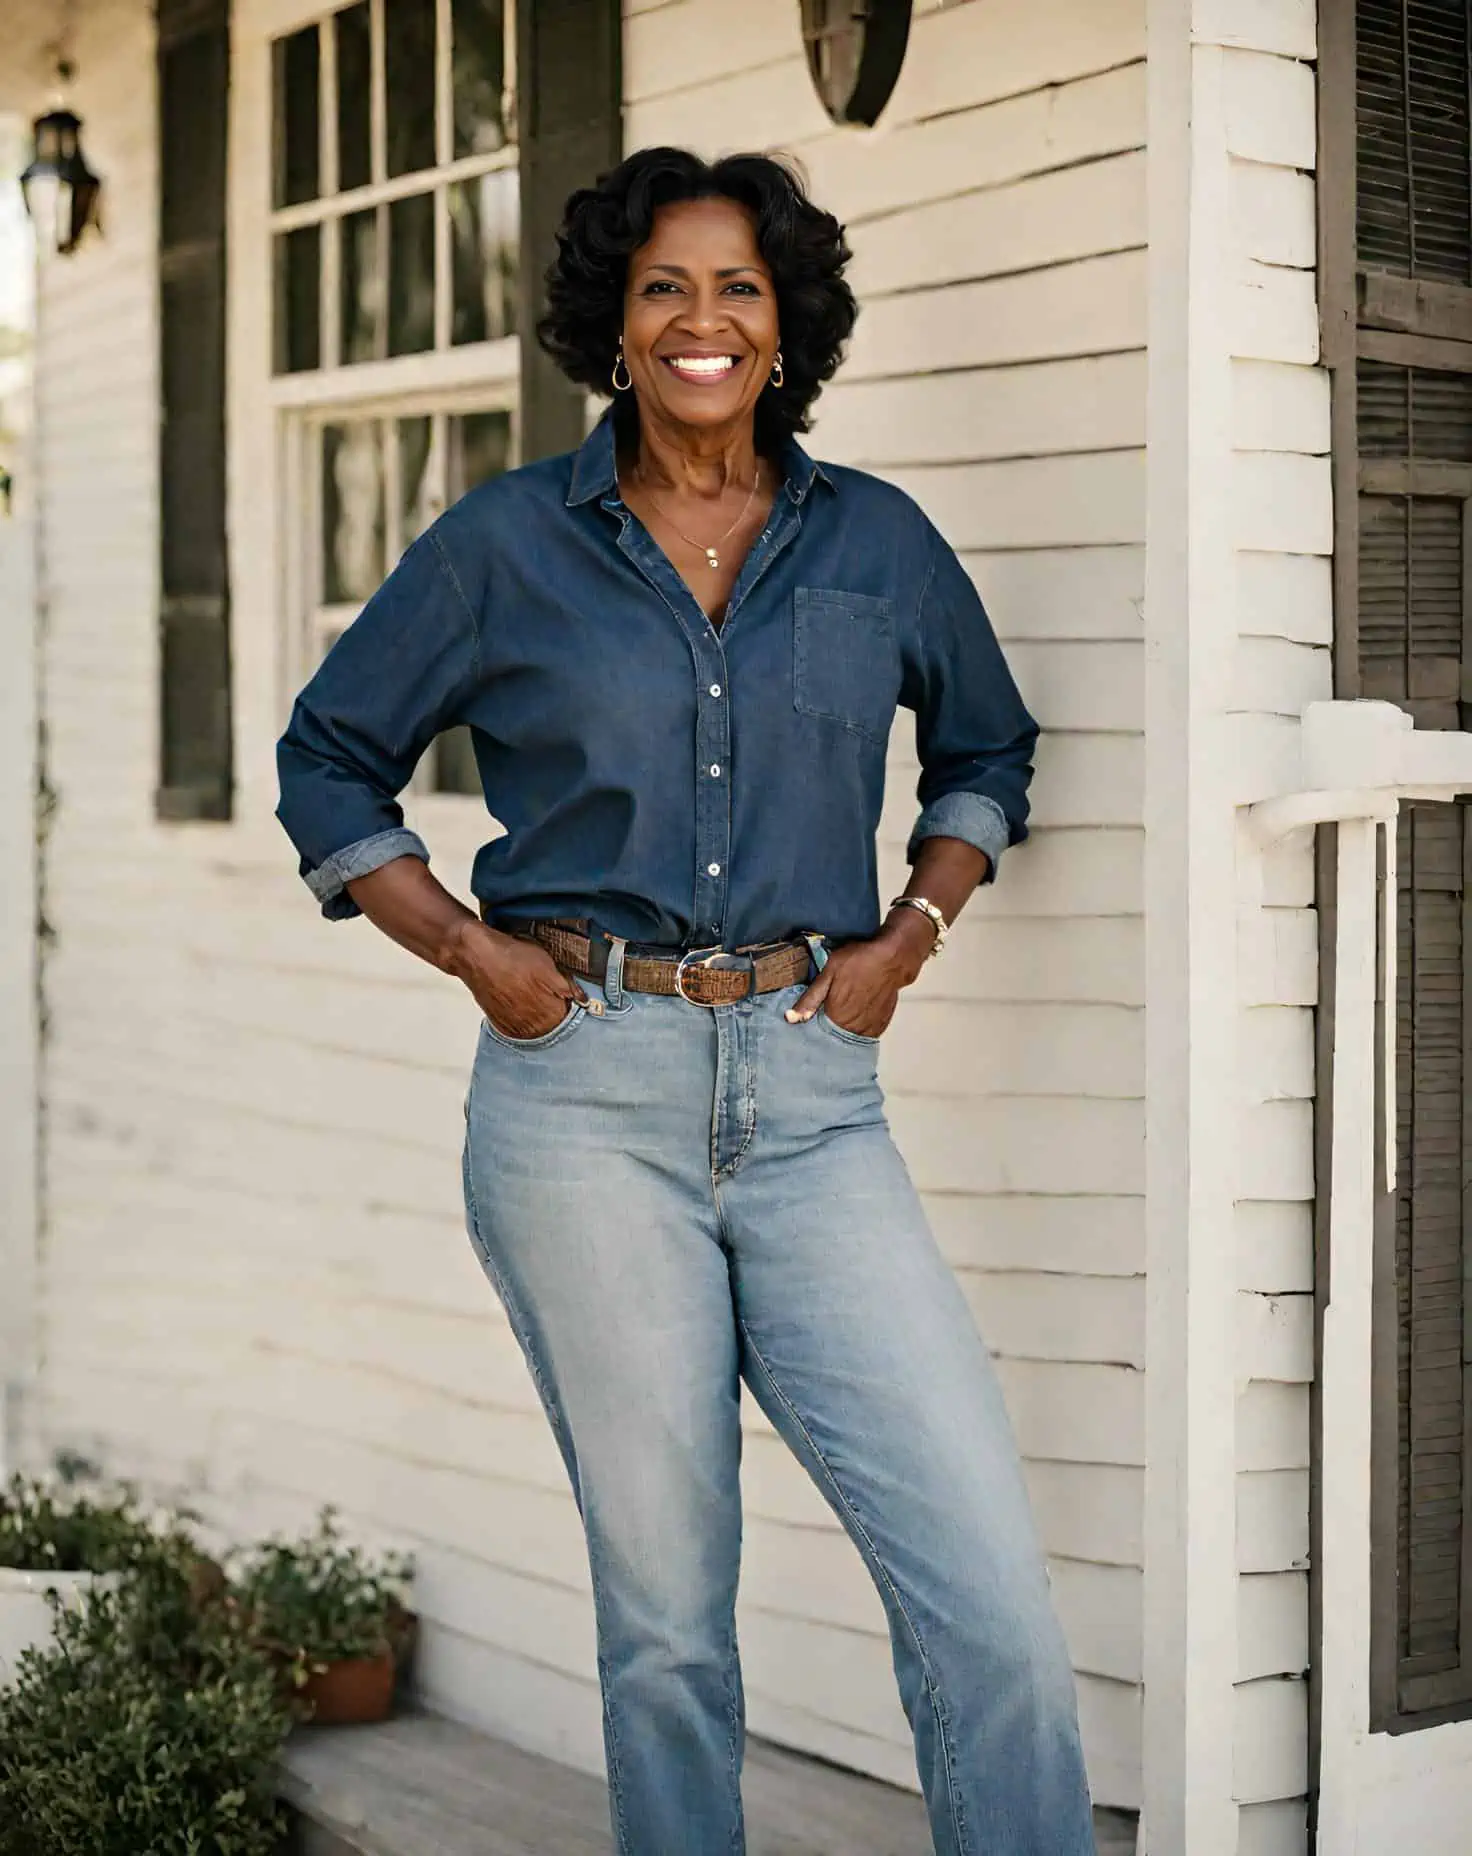 The Ultimate Jeans Guide for Women Over 60: 15 Styles You'll Love